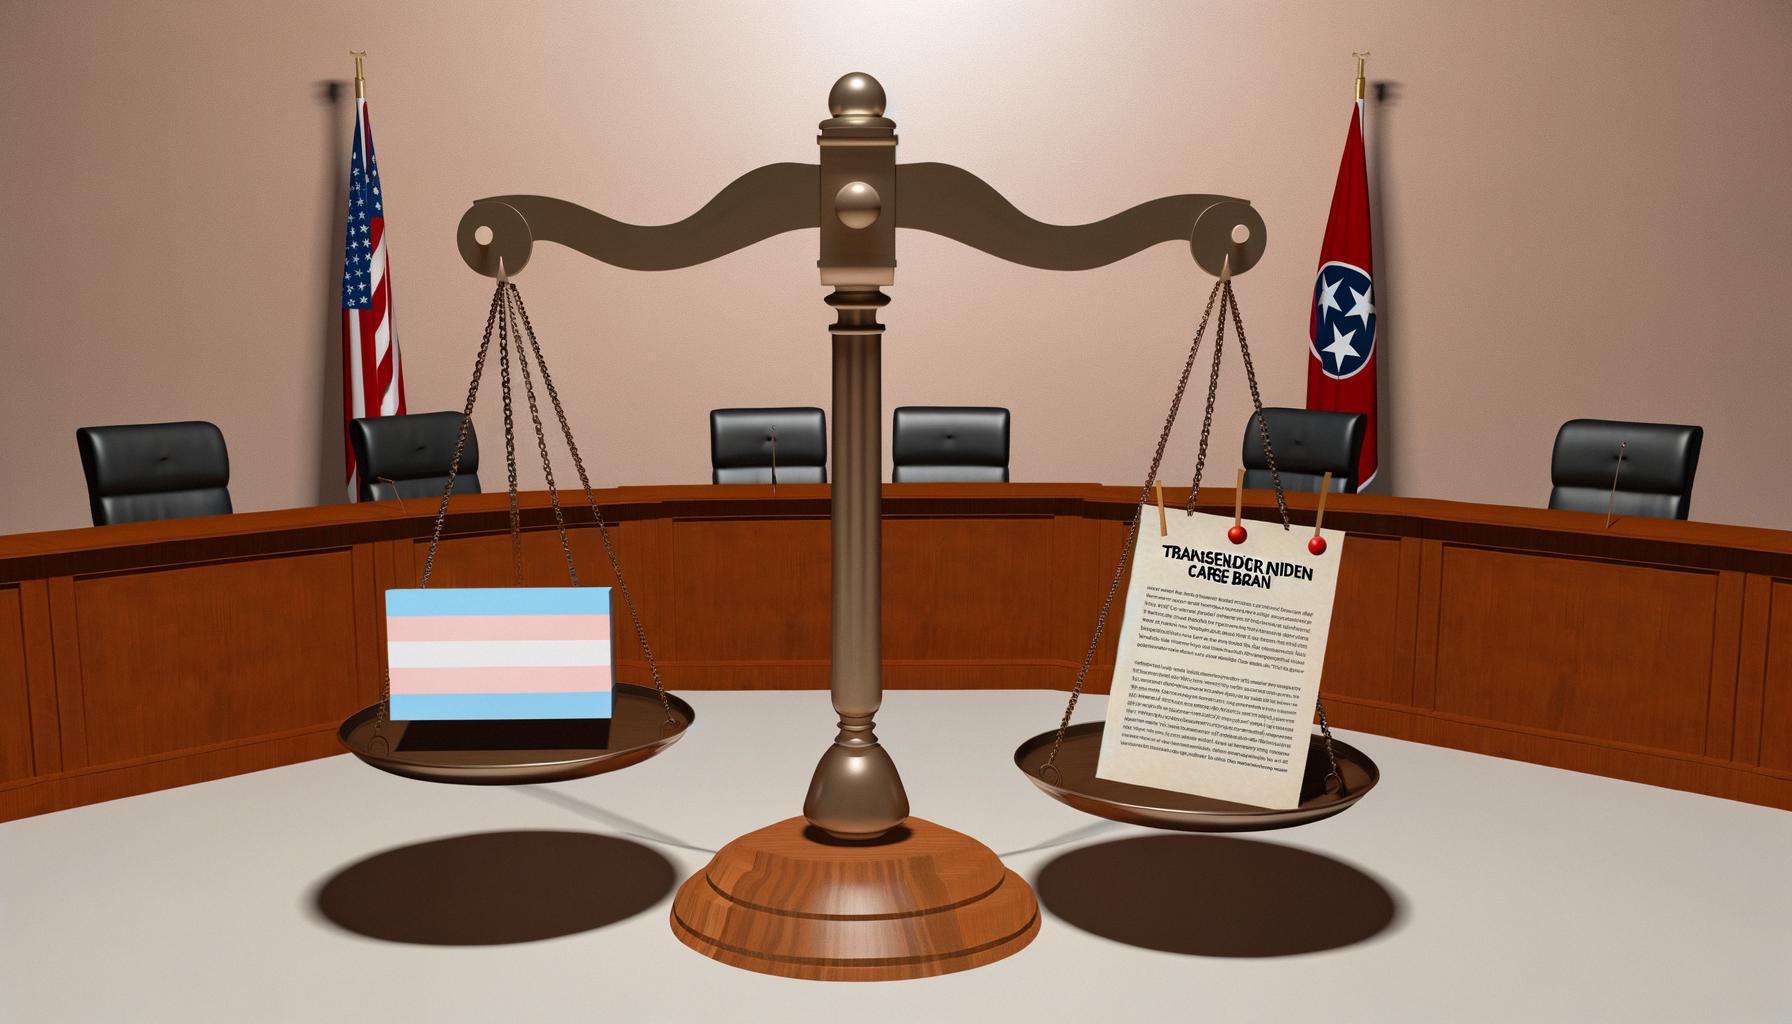 Supreme Court to decide legality of Tennessee's transgender minor care ban